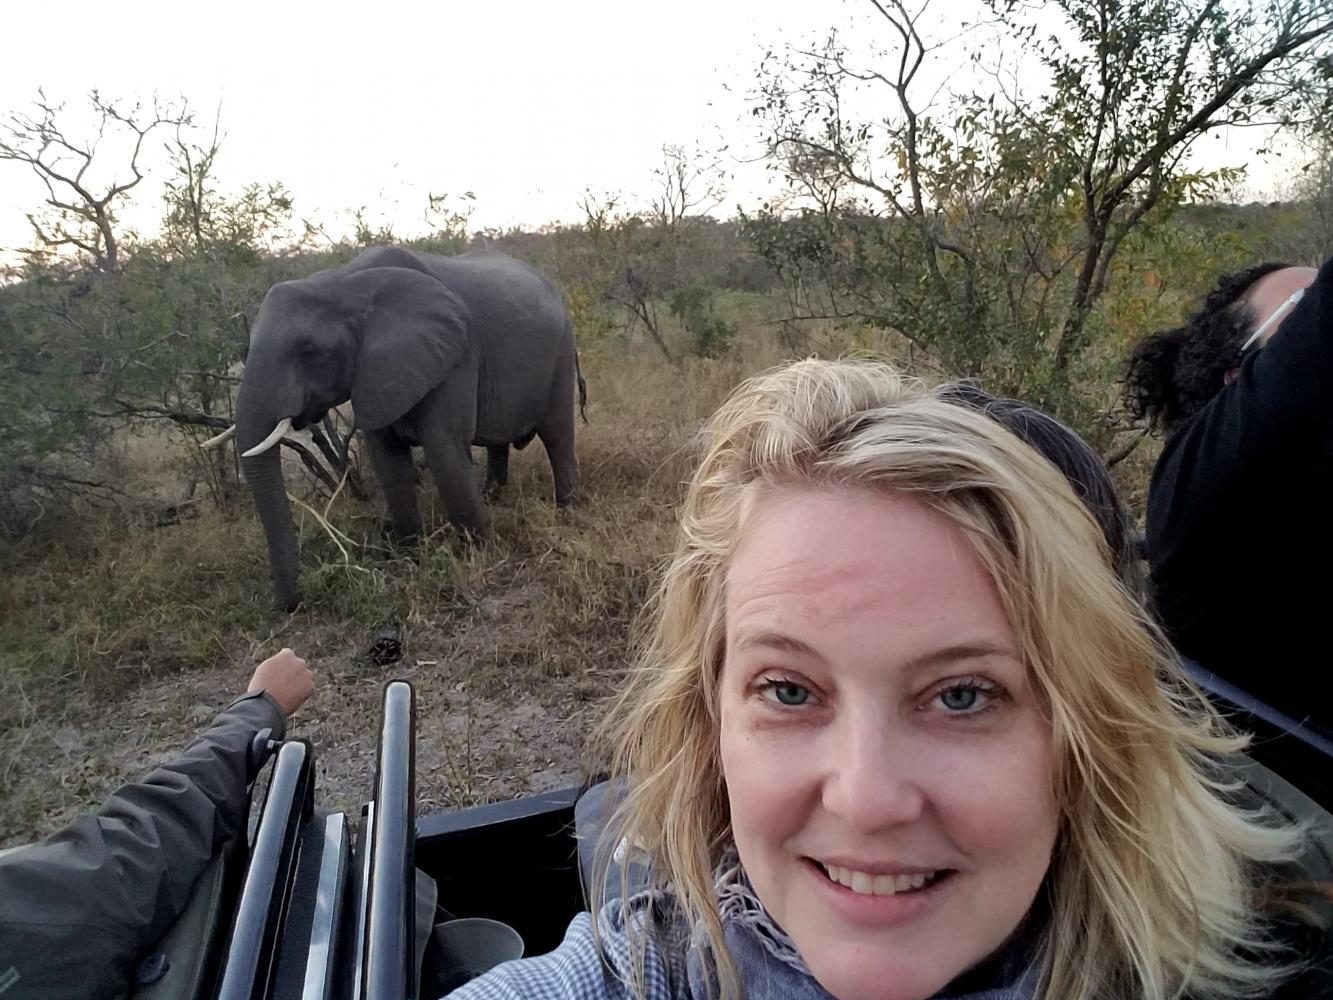 Barr poses for a selife on safari in South Africa.